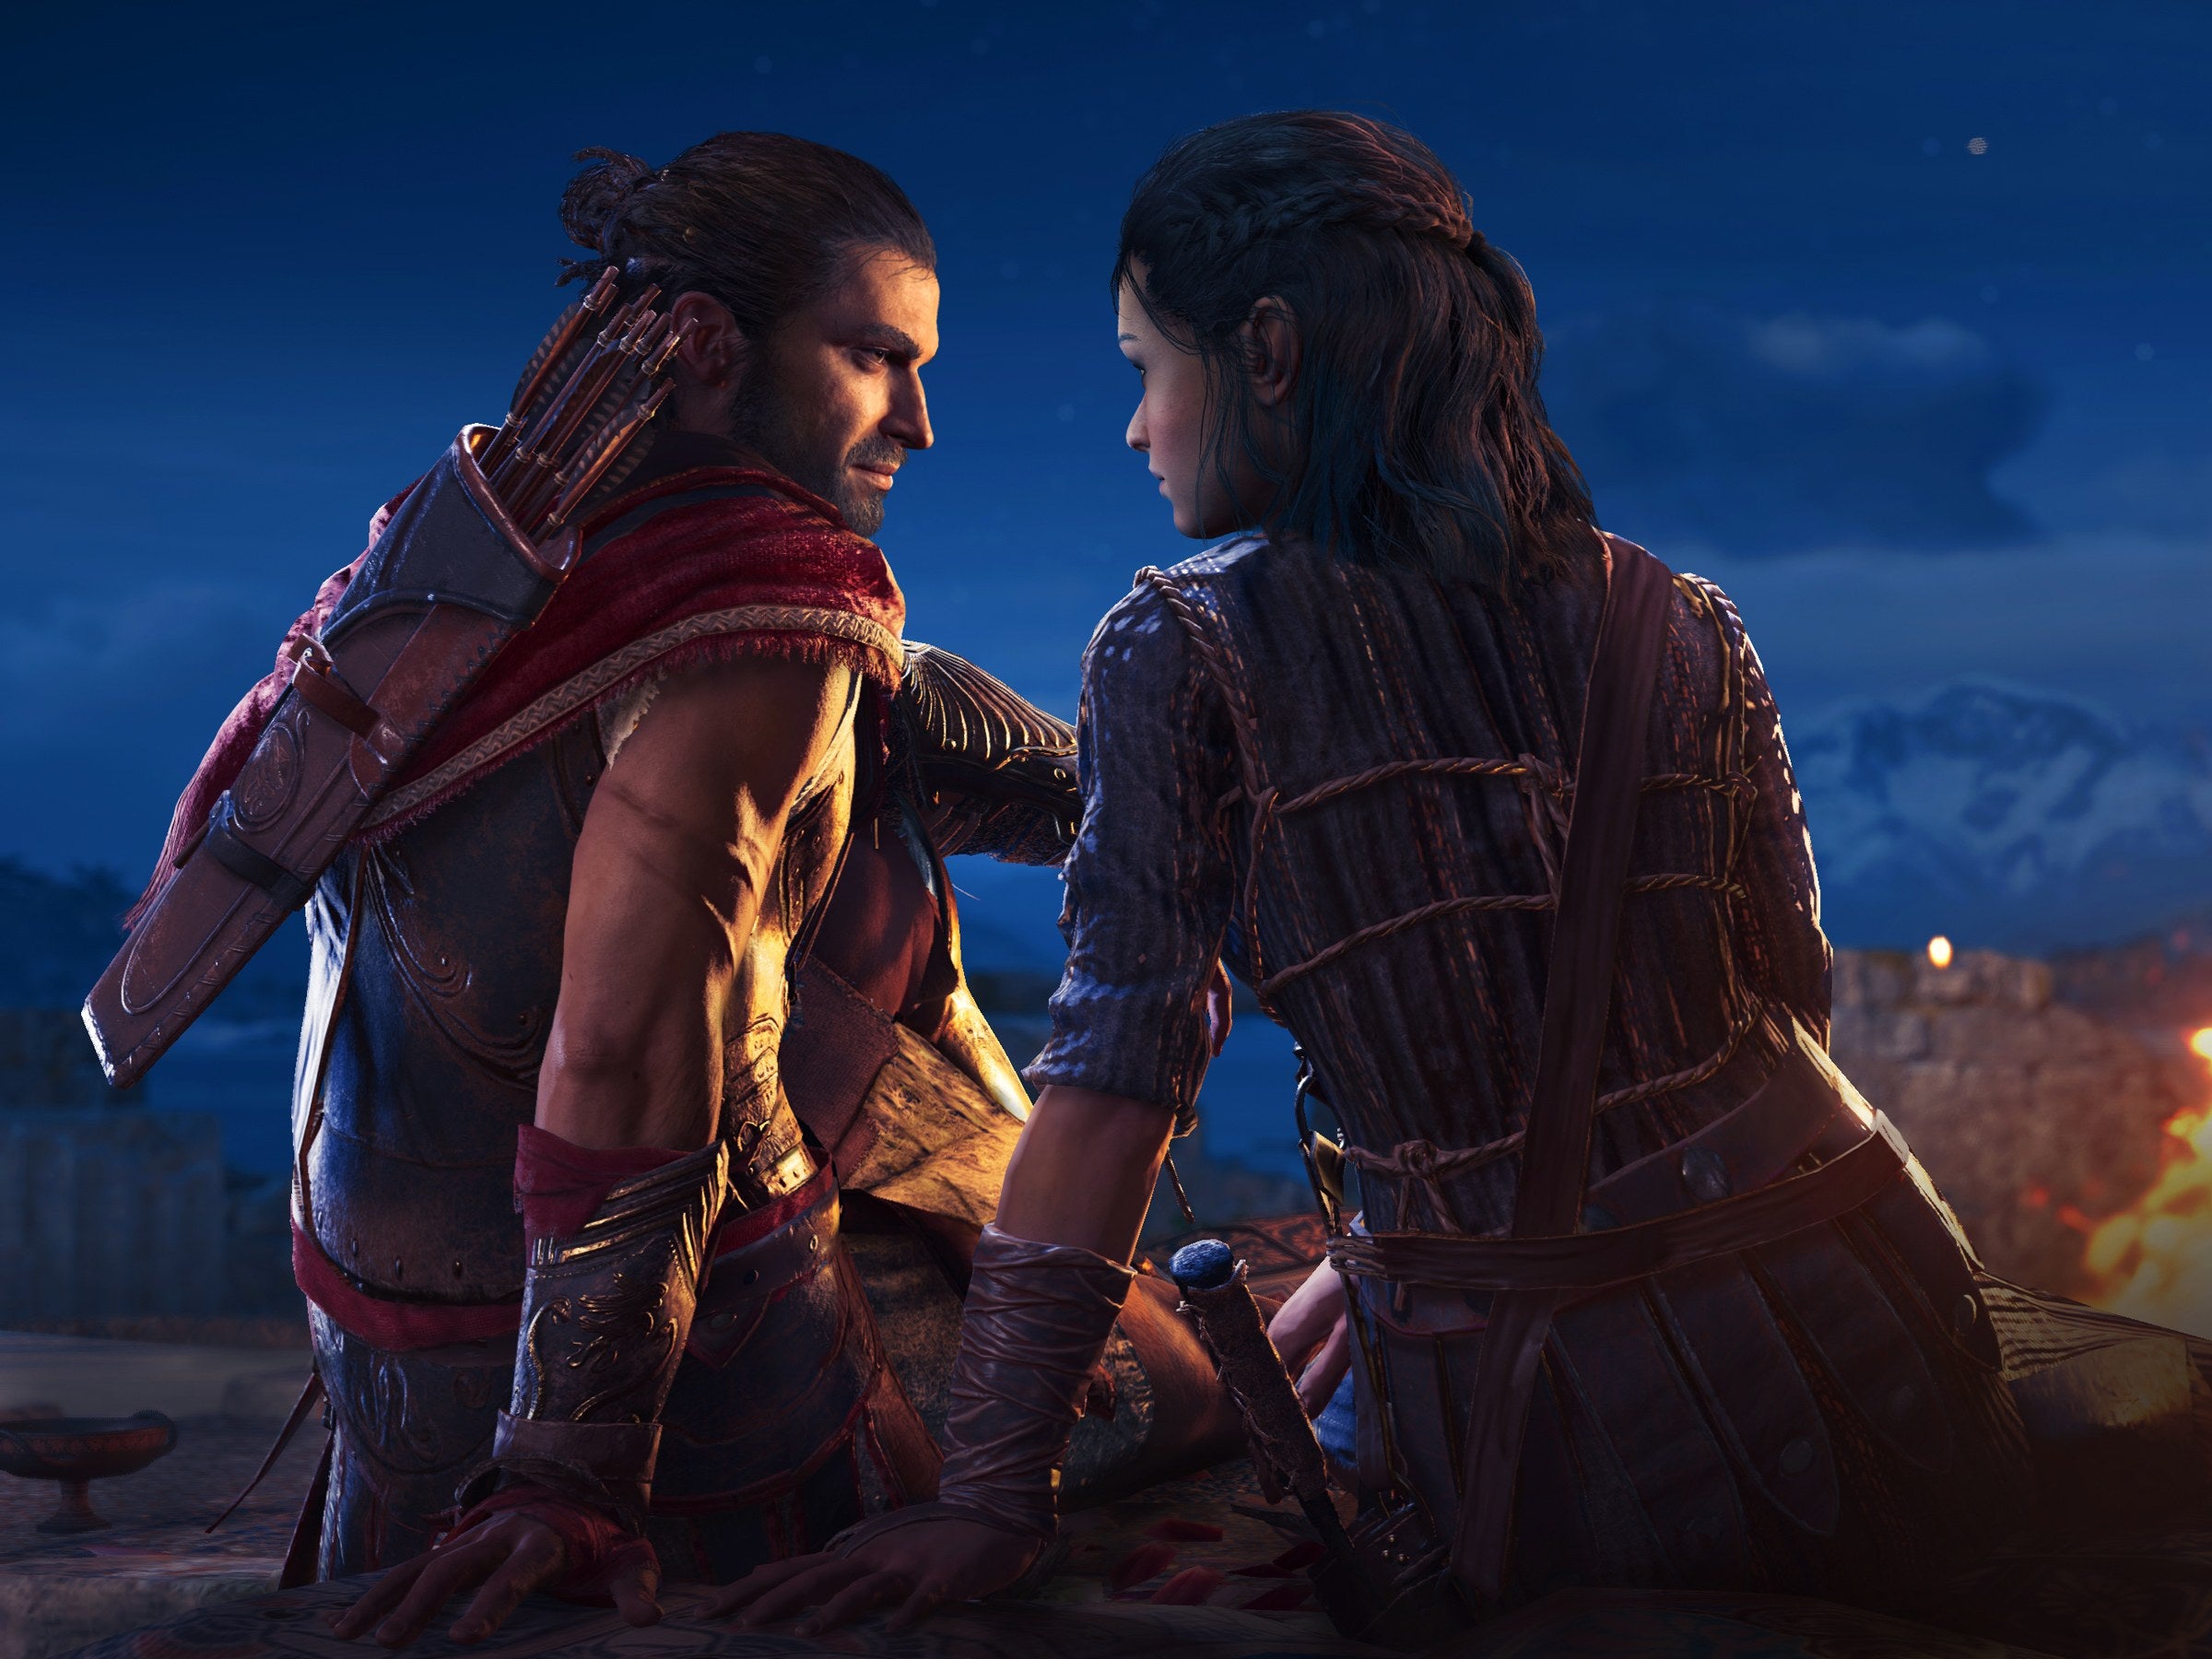 Grafting reach Round down Ubisoft apologises for forcing heterosexual romance in Assassin's Creed  Odyssey DLC | GamesIndustry.biz